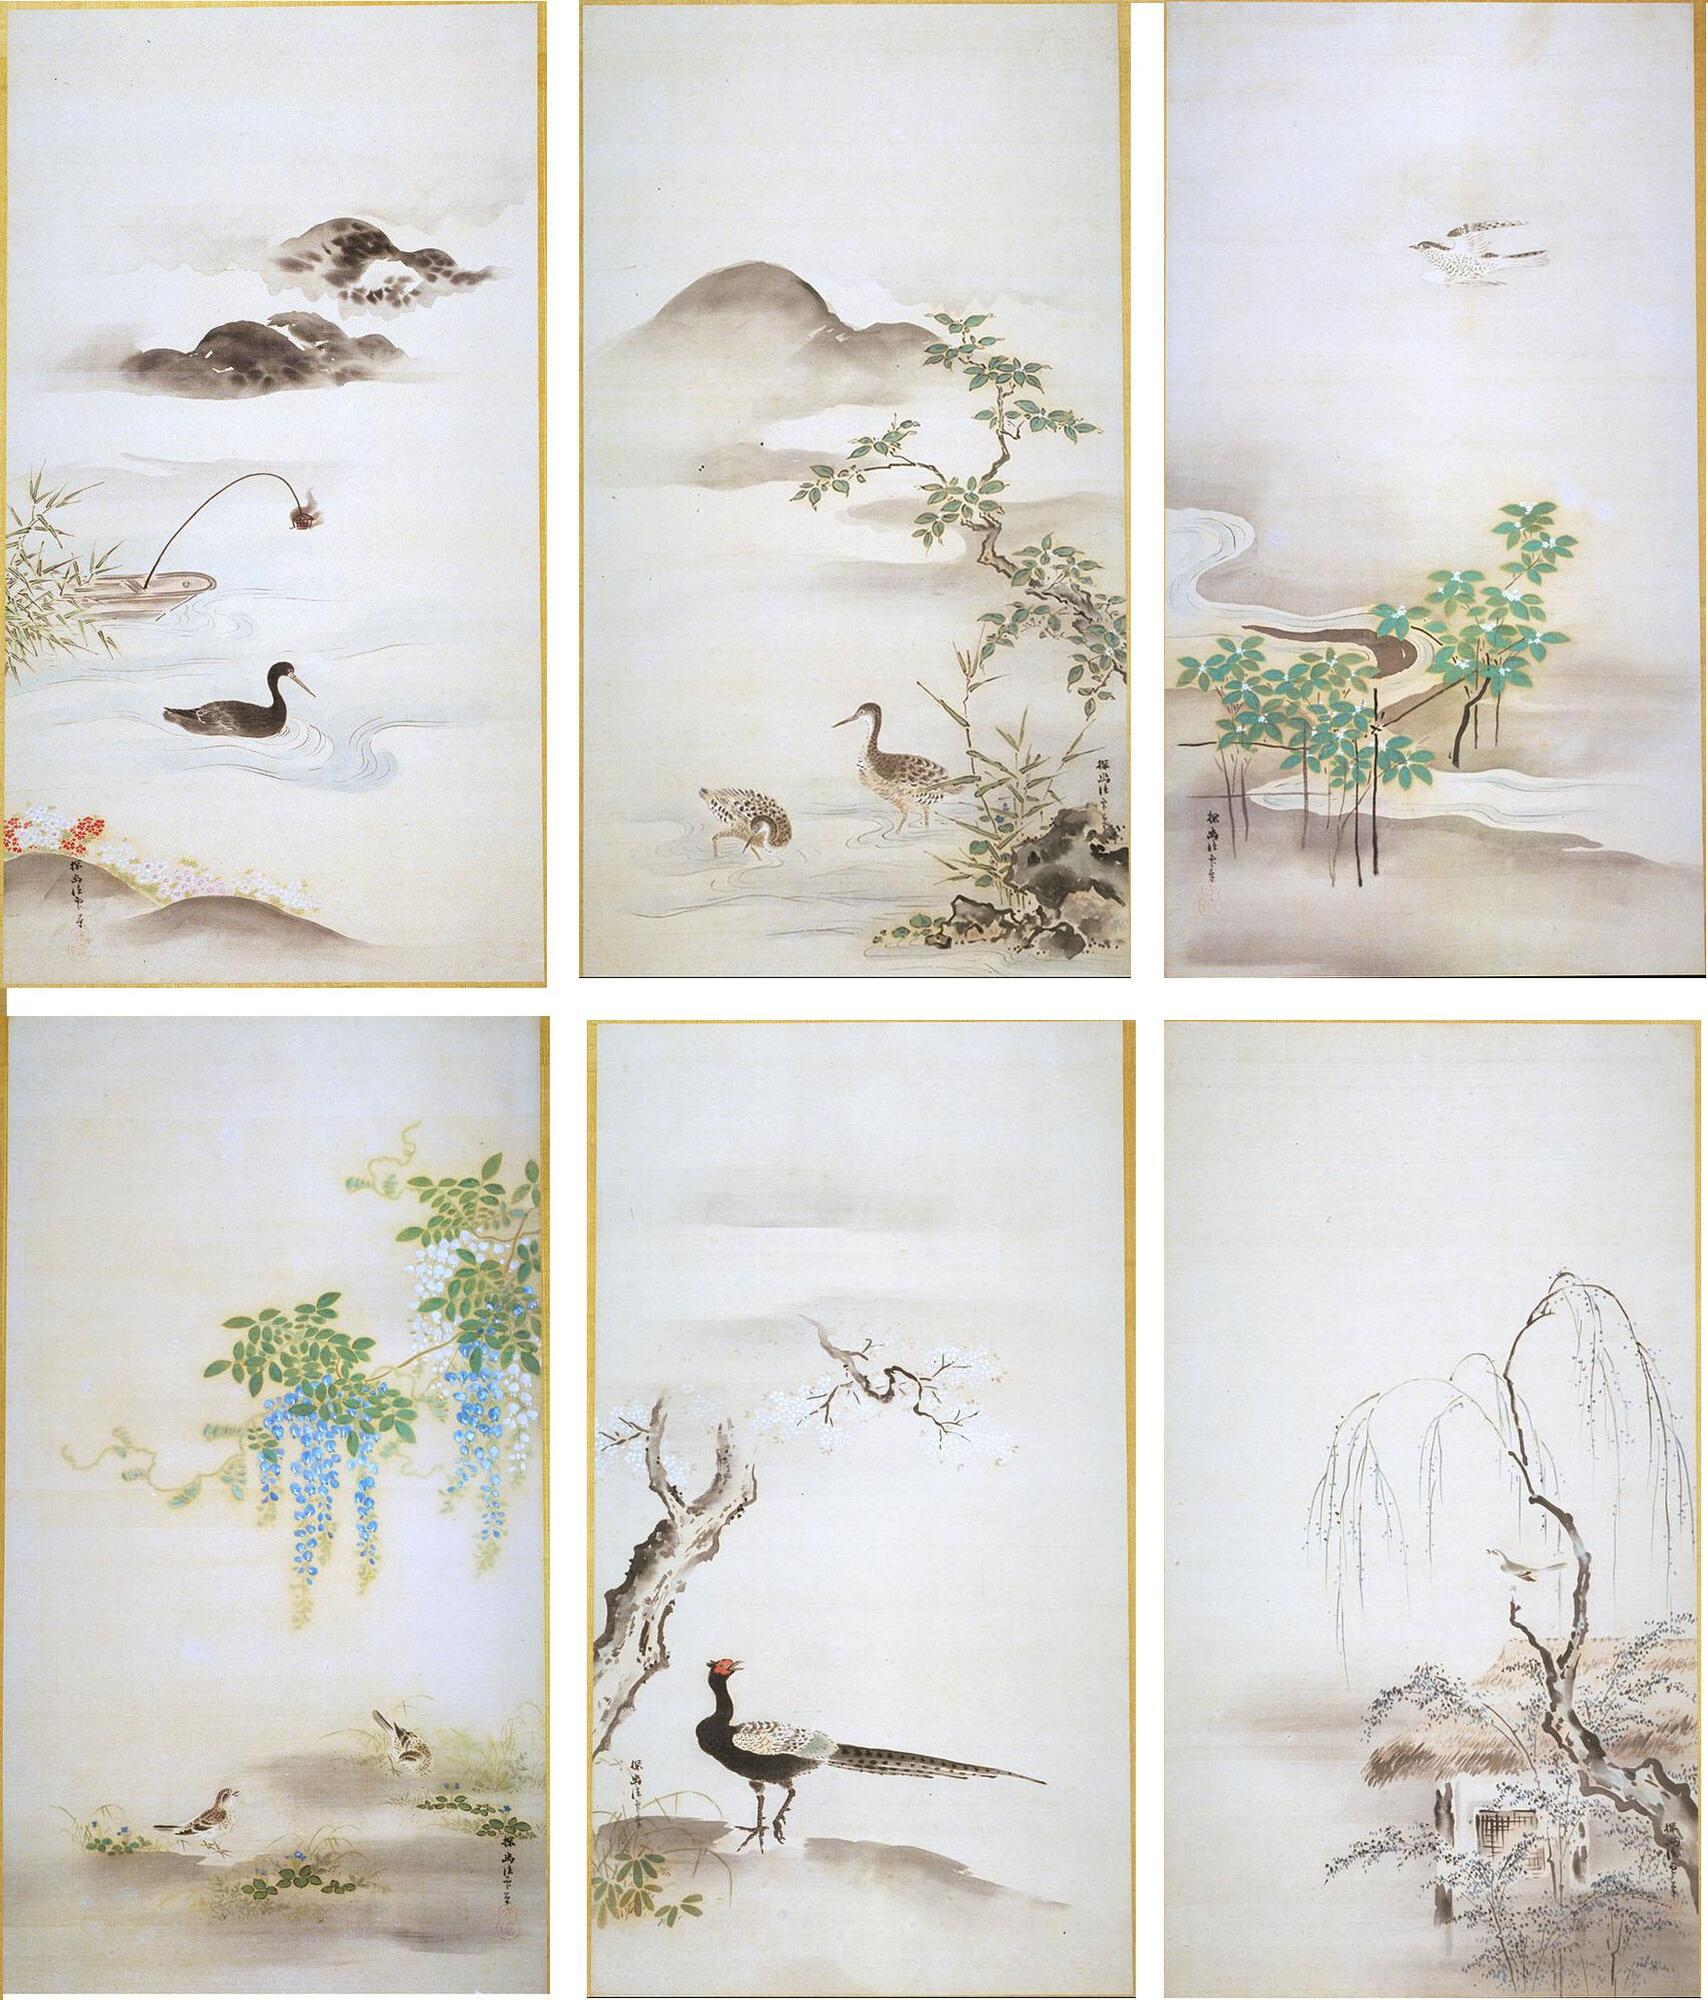 These panels represent six of the twelve months. The panels each have calligraphy and a red seal in one corner. In each panel there is a bird and a type of plant, which are suggestive of particular months. On the top left panel there is bamboo, the bow of the boat with a small lamp attached to it, and a type of water fowl. In the bottom middle panel is a blooming sakura tree and a pheasant. In the bottom left panel is blue and white wisteria ans small sparrows. In the bottom right panel there is a willow slowly coming back to life after winter over a thatched building.